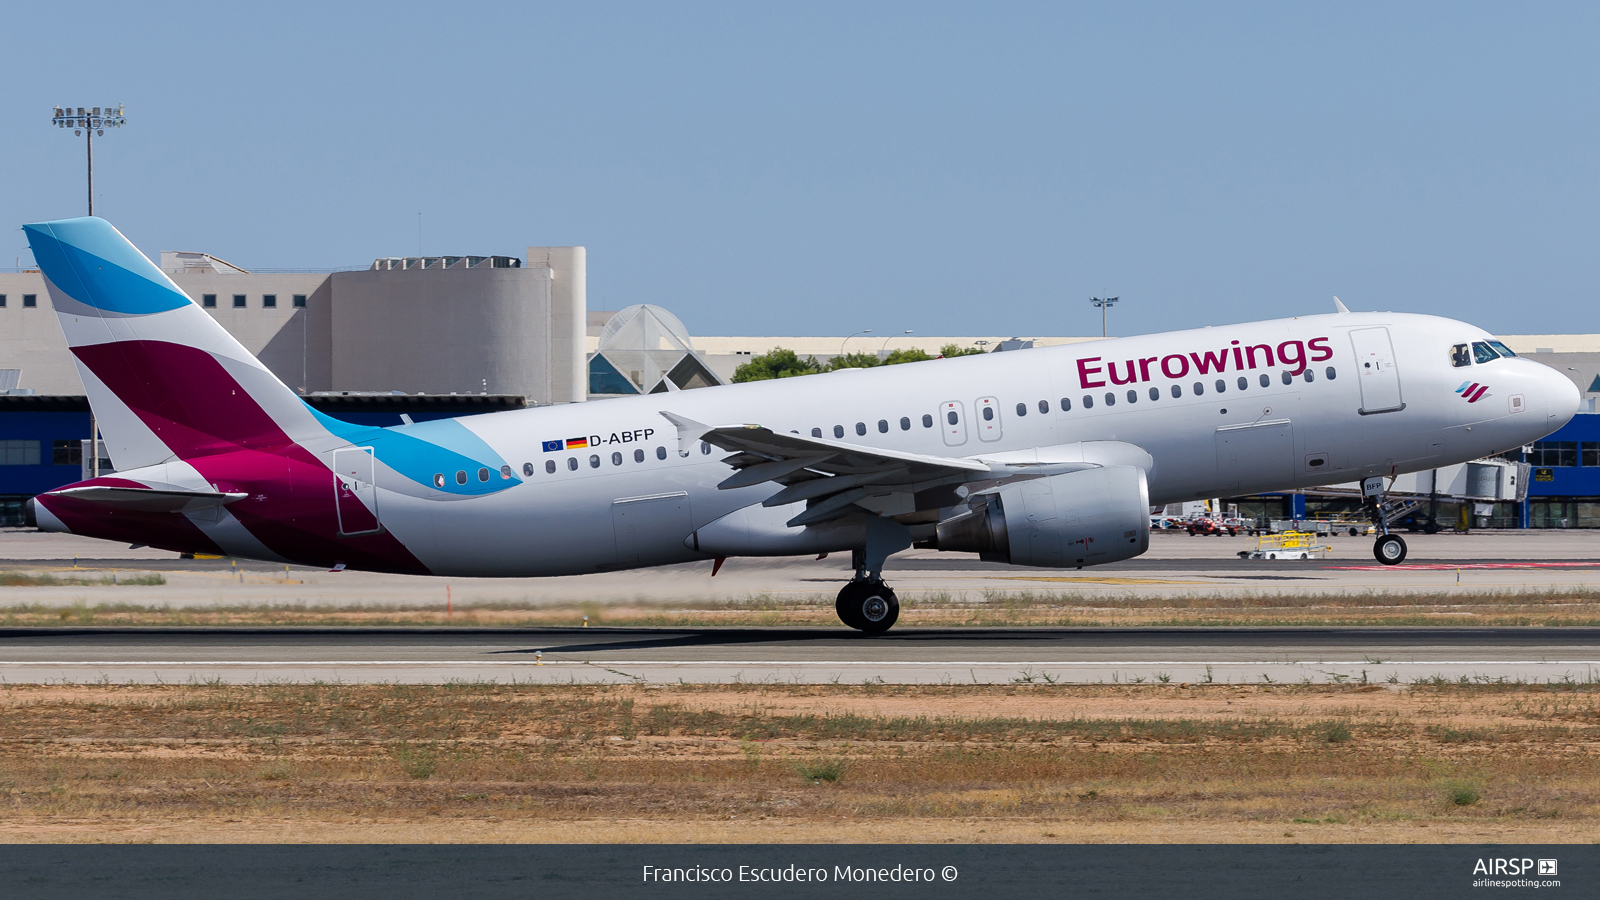 Eurowings  Airbus A320  D-ABFP